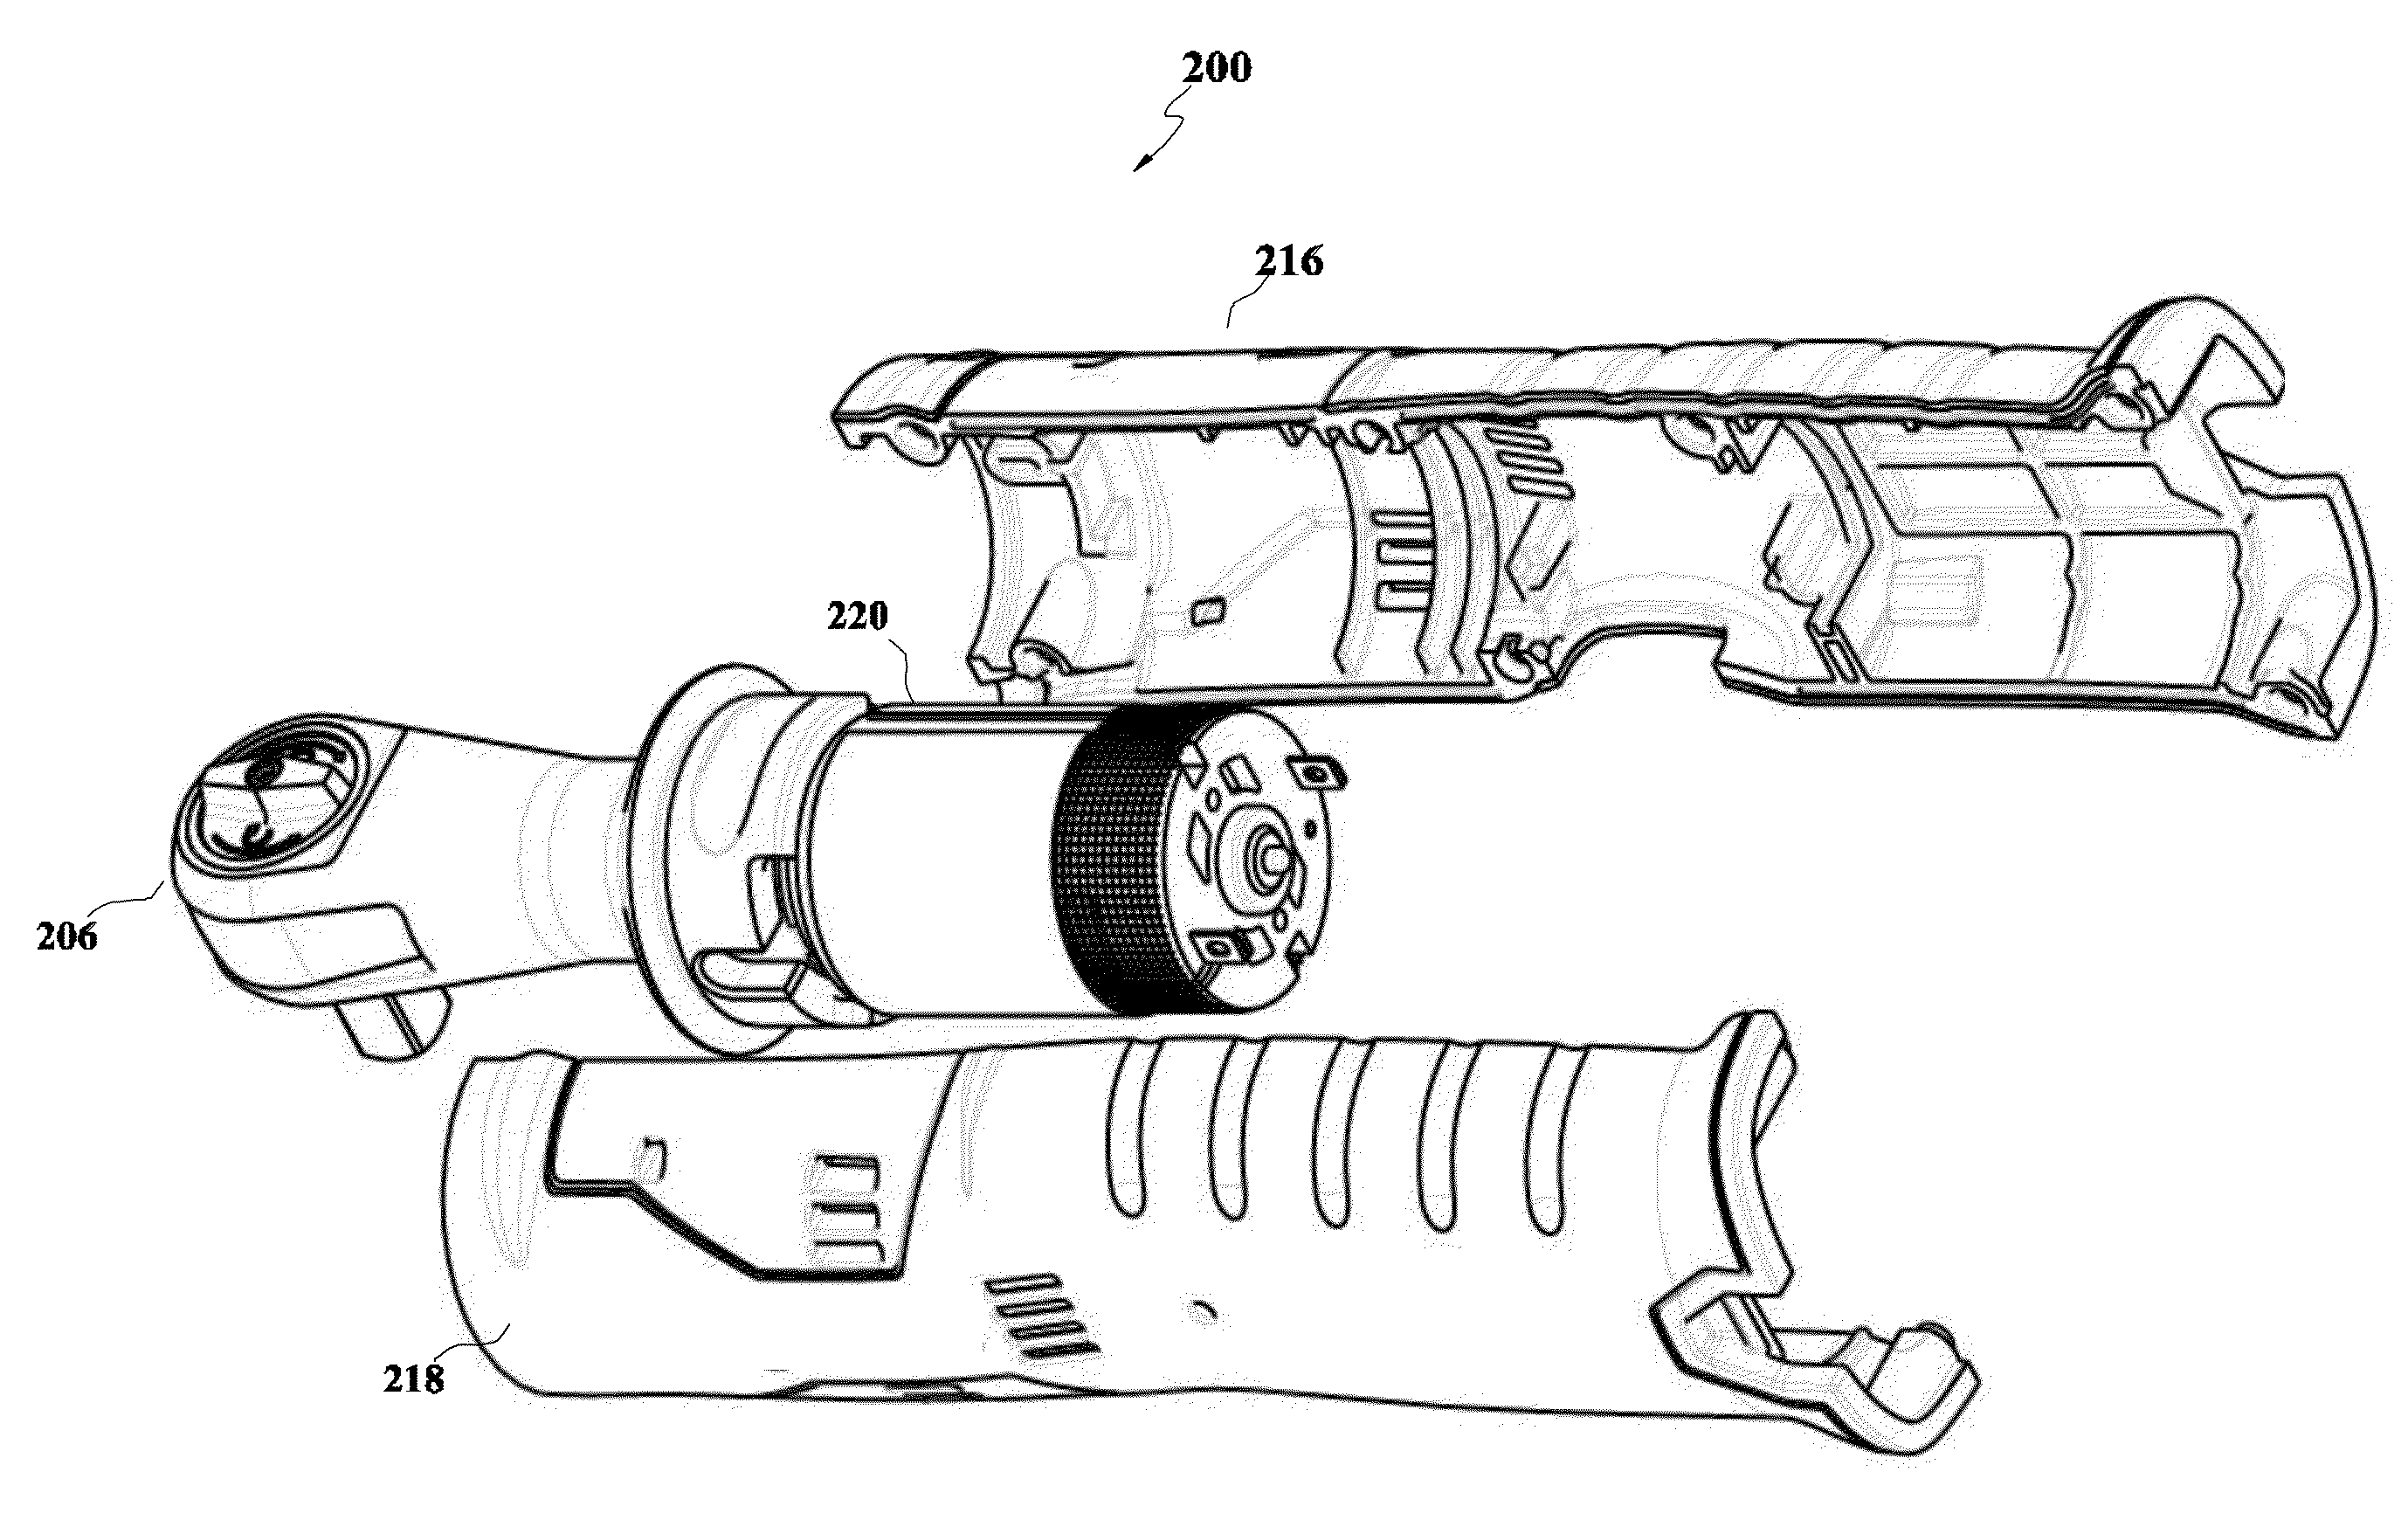 Hand tool head assembly and housing apparatus